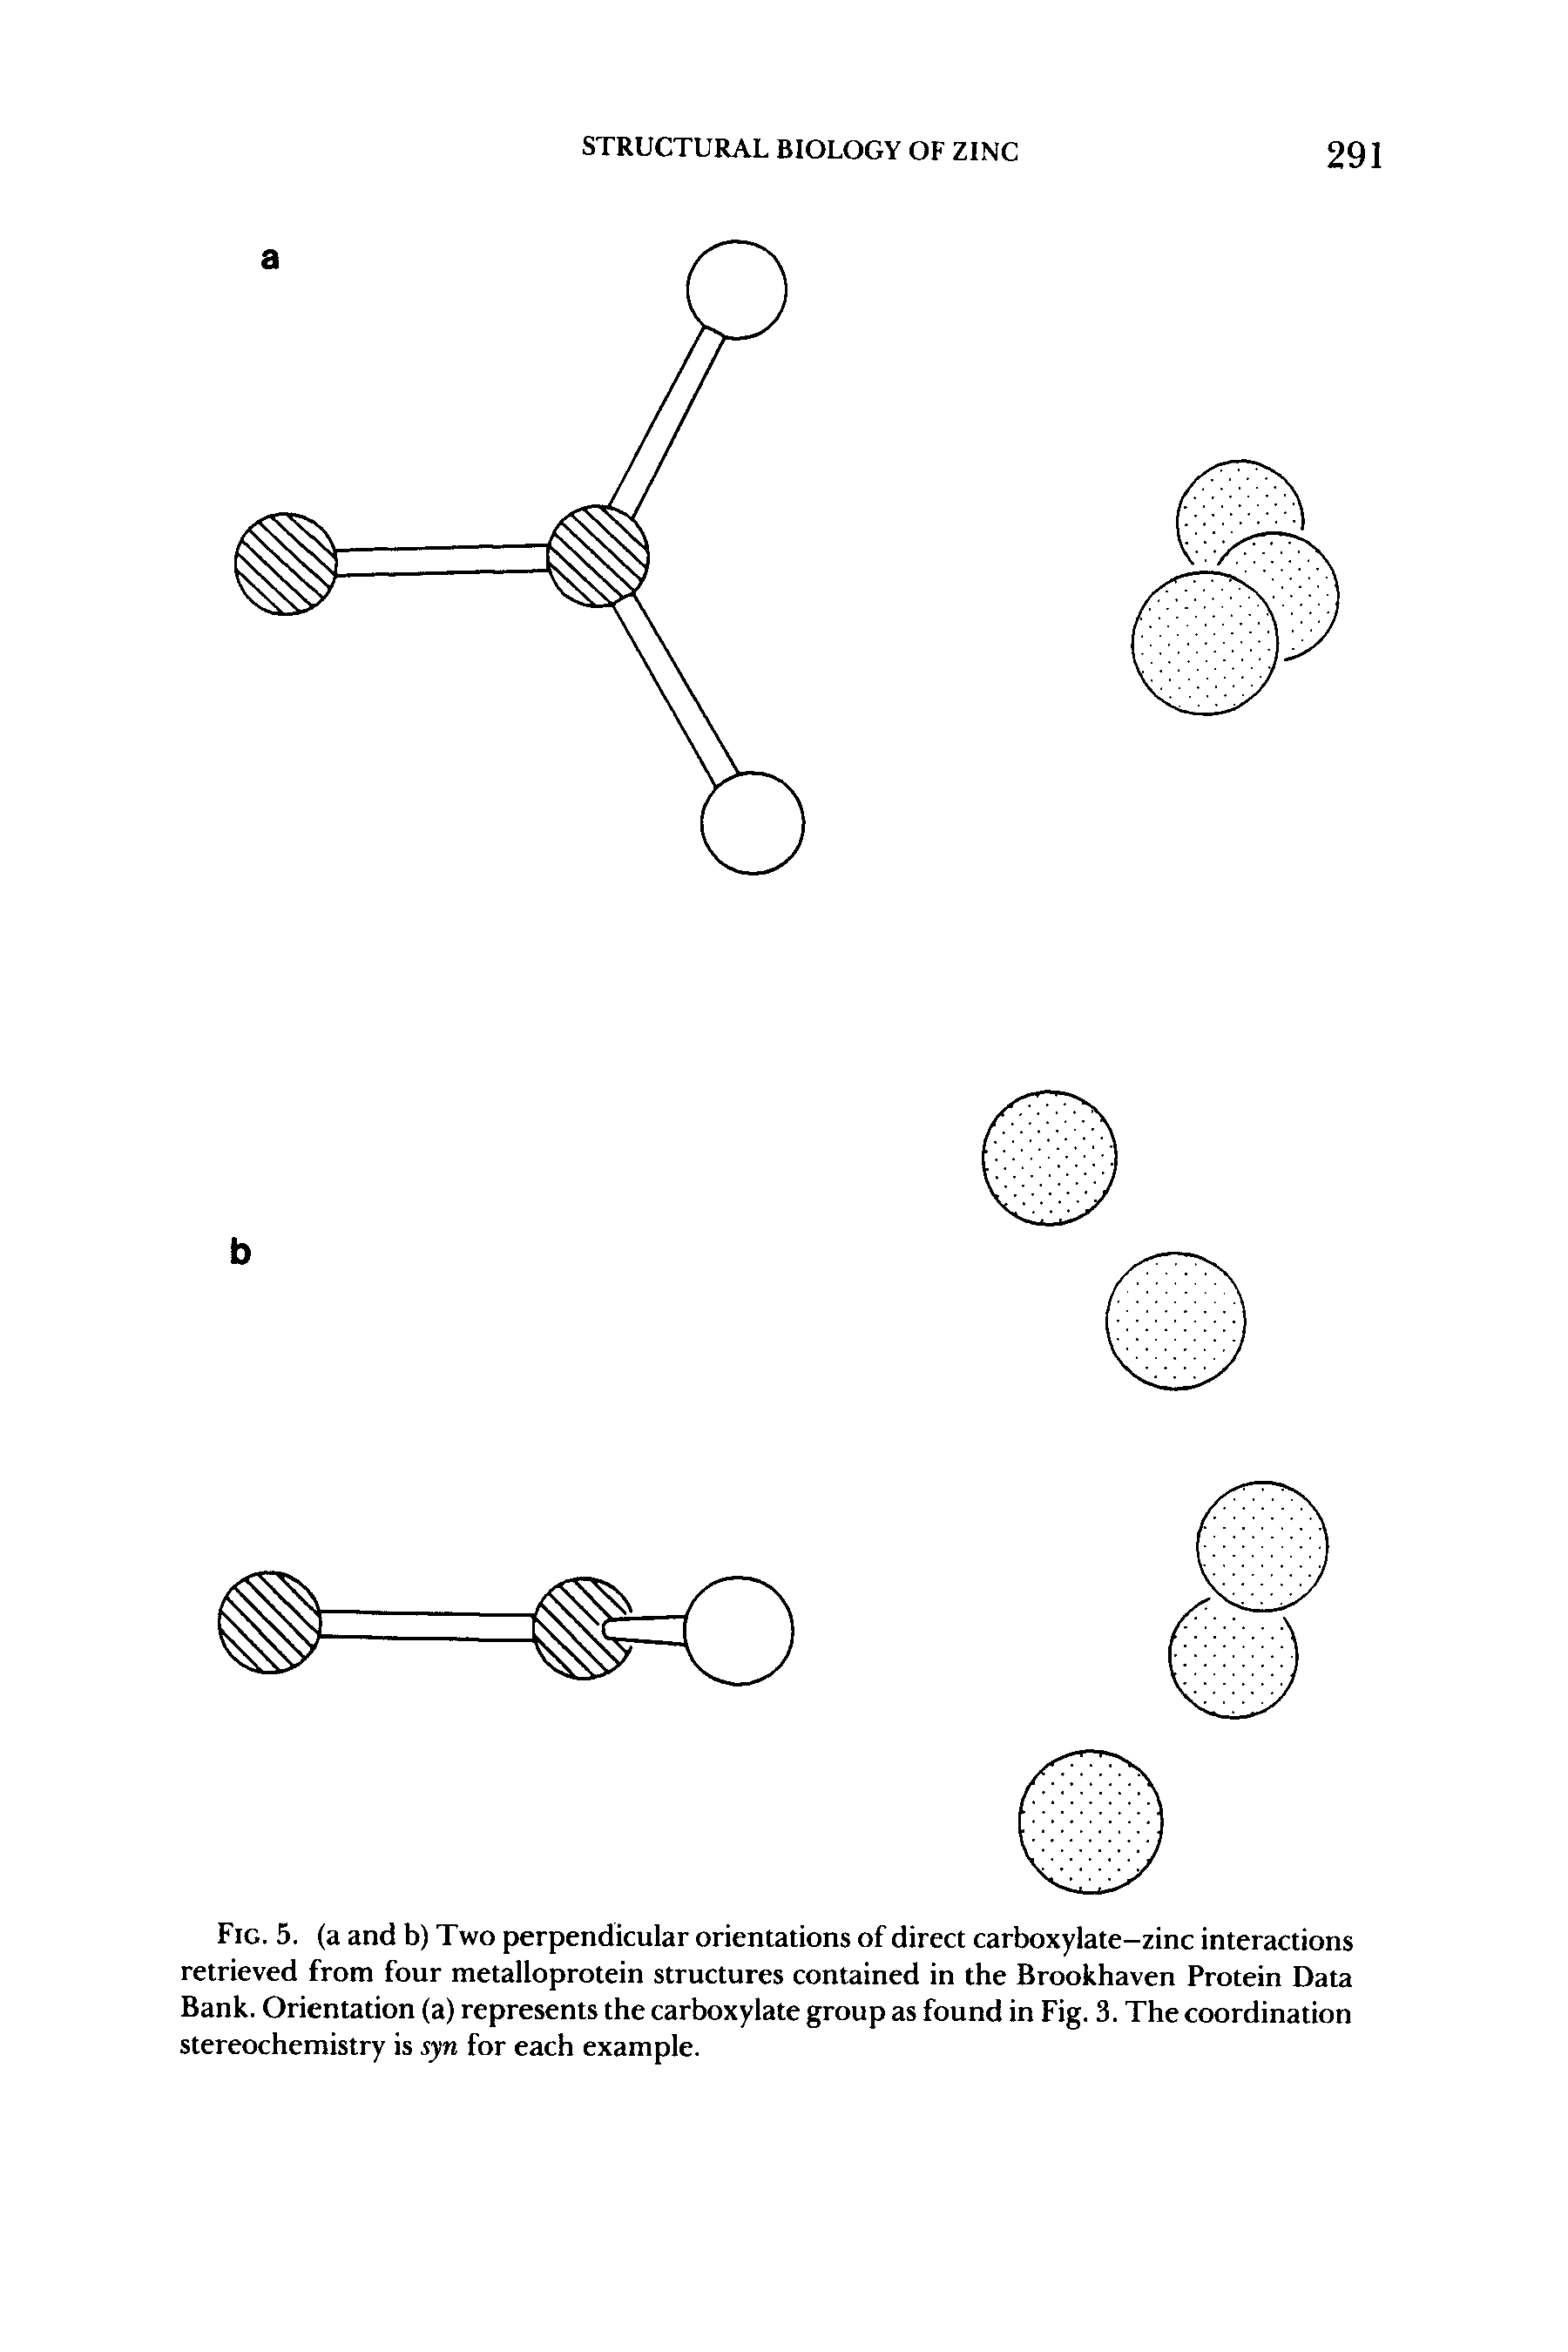 Fig. 5. (a and b) Two perpendicular orientations of direct carboxylate-zinc interactions retrieved from four metalloprotein structures contained in the Brookhaven Protein Data Bank. Orientation (a) represents the carboxylate group as found in Fig. 3. The coordination stereochemistry is syn for each example.